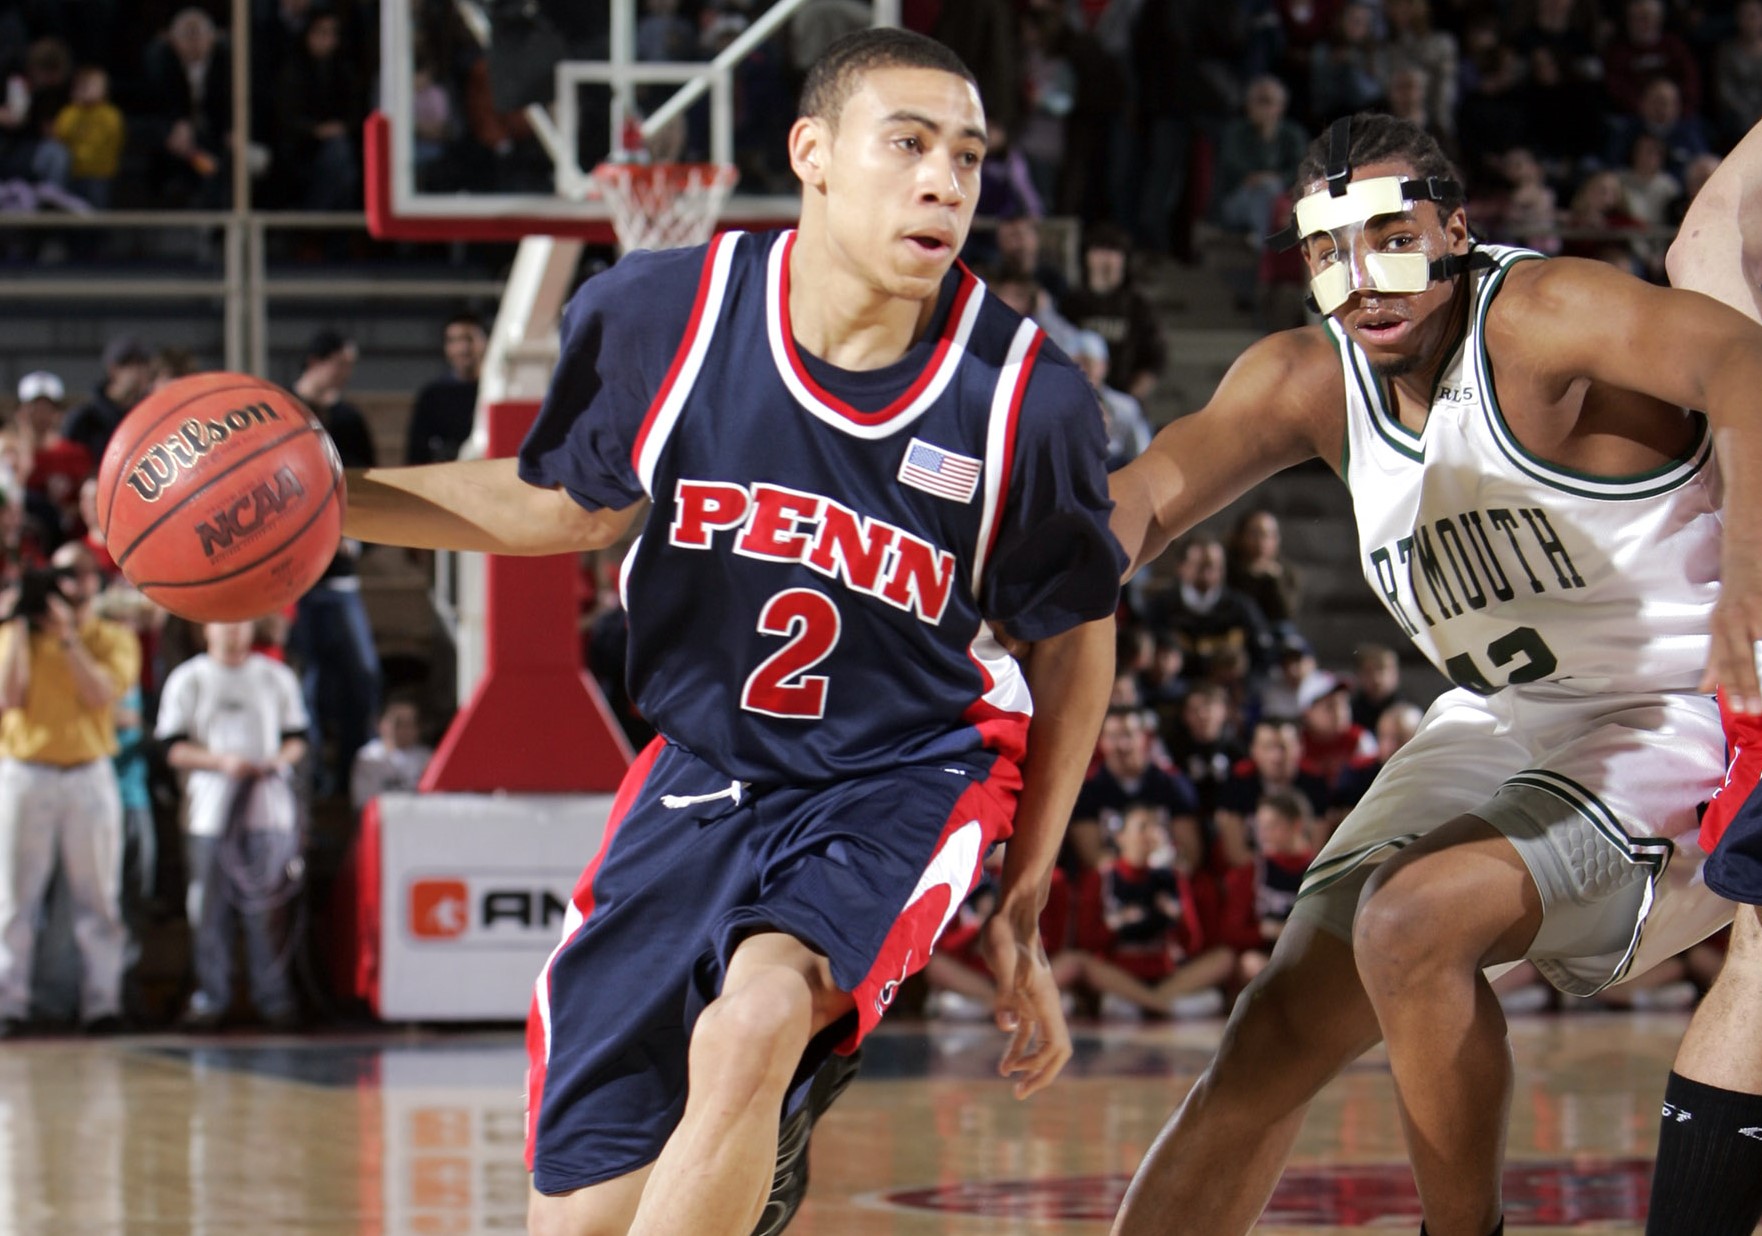 Penn State vs UPenn: Which Is Ivy League?